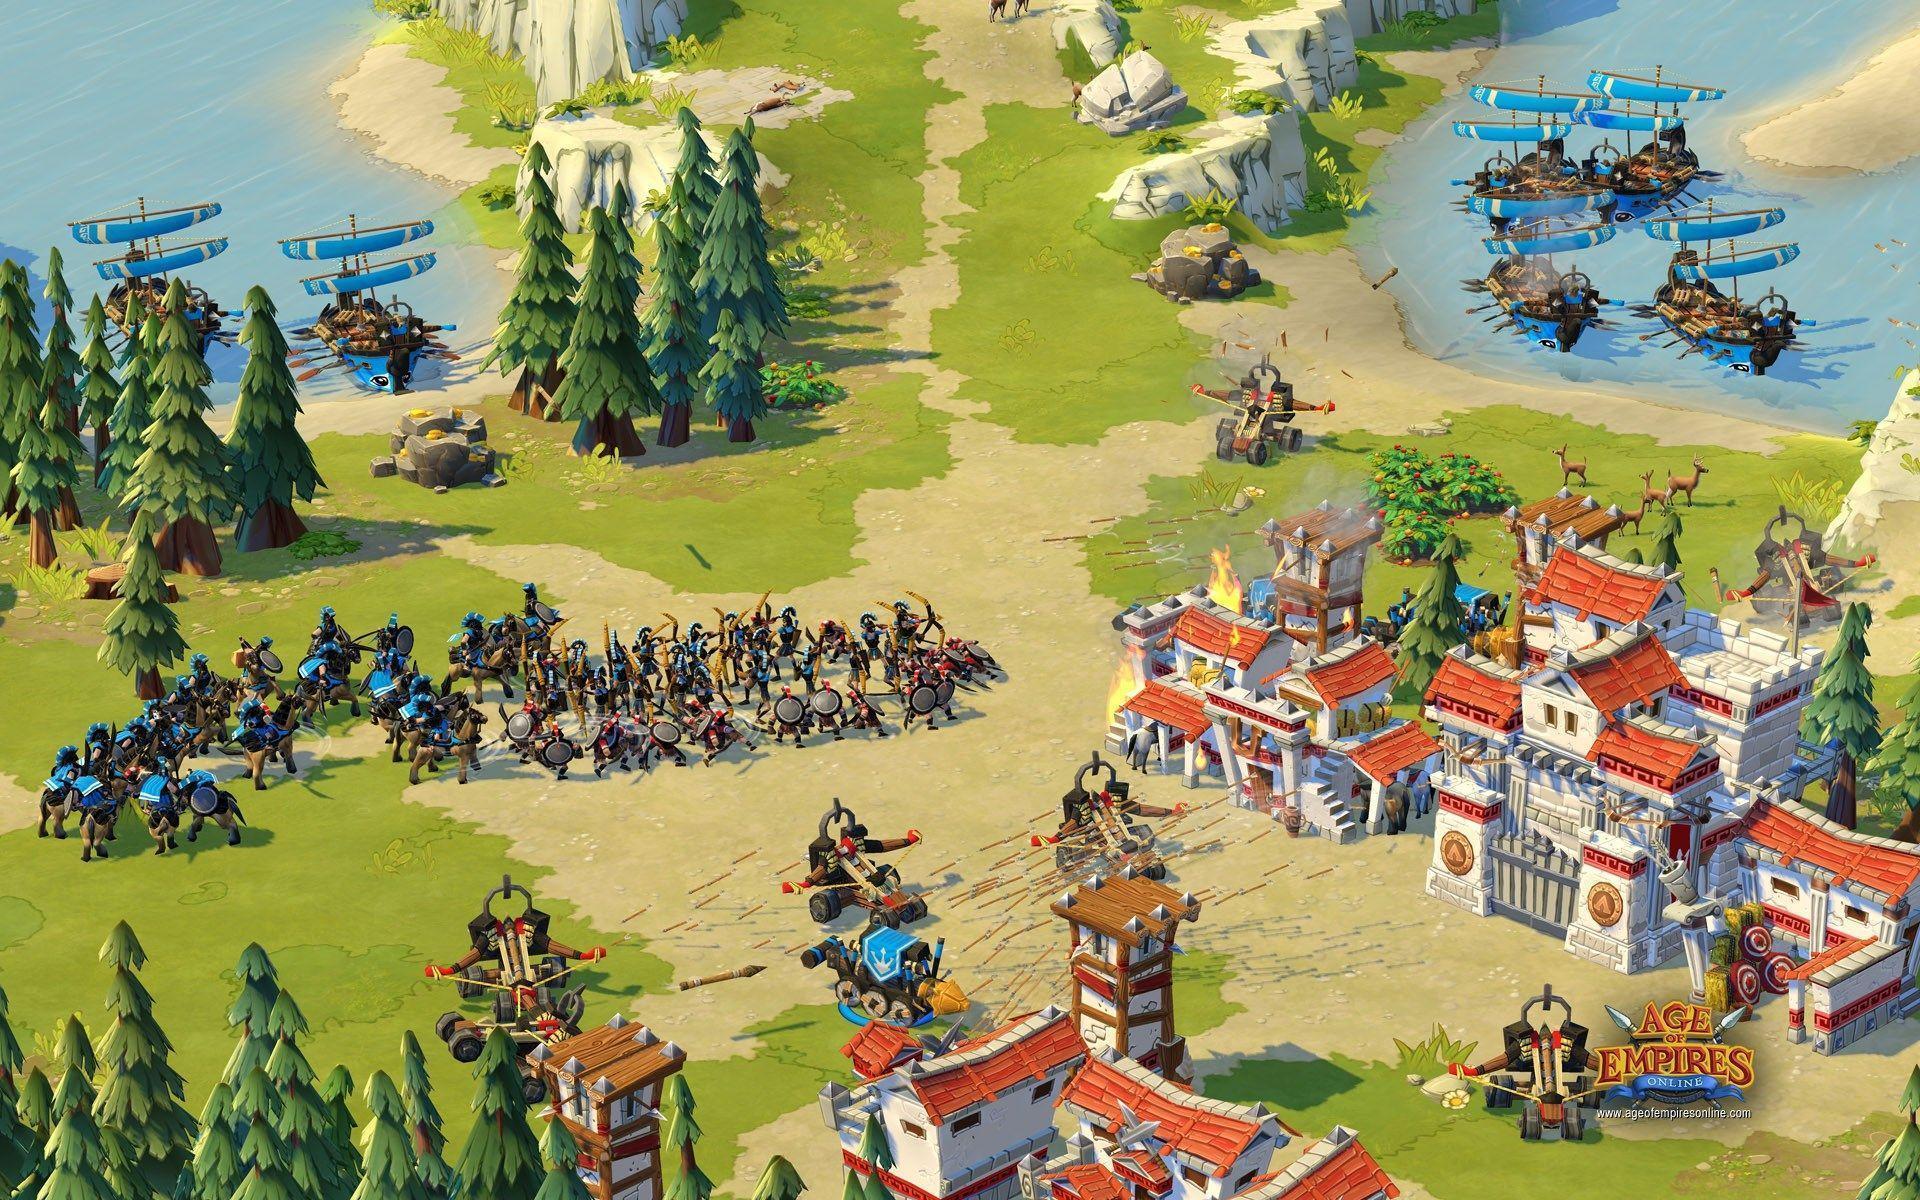 age of empires hd edition 4k small